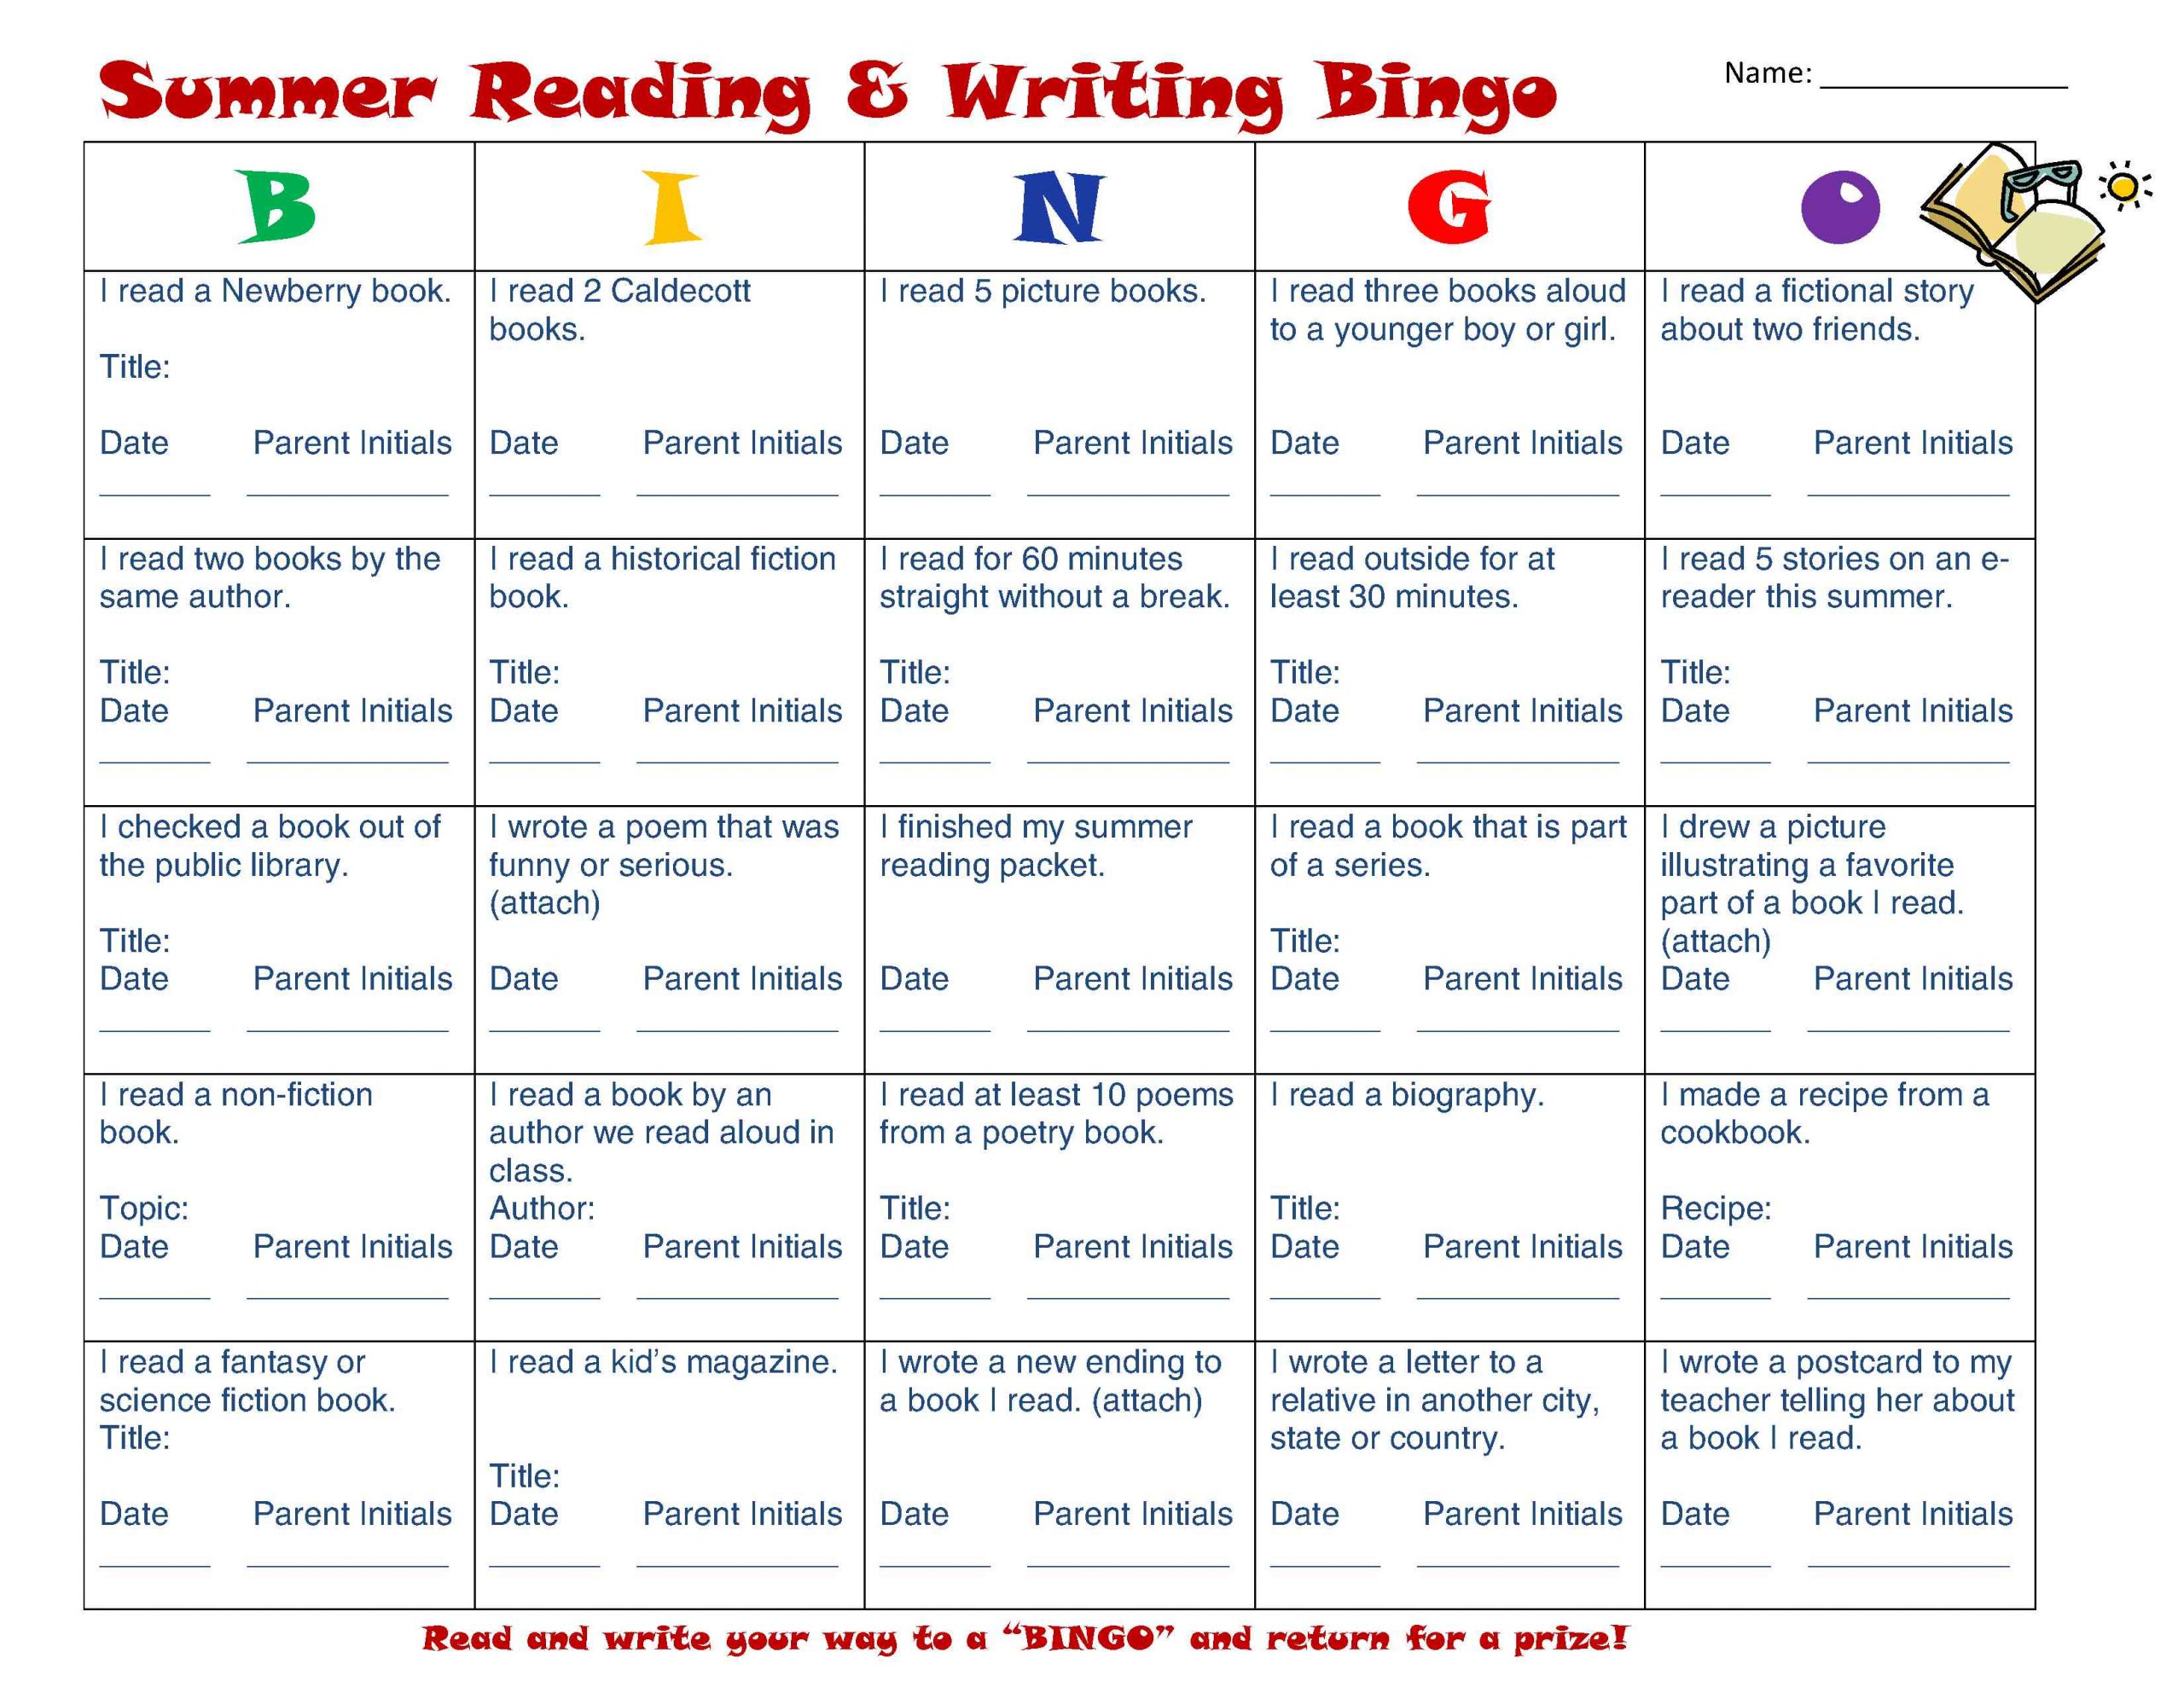 5 Ways To Keep Your Students Writing All Summer Long